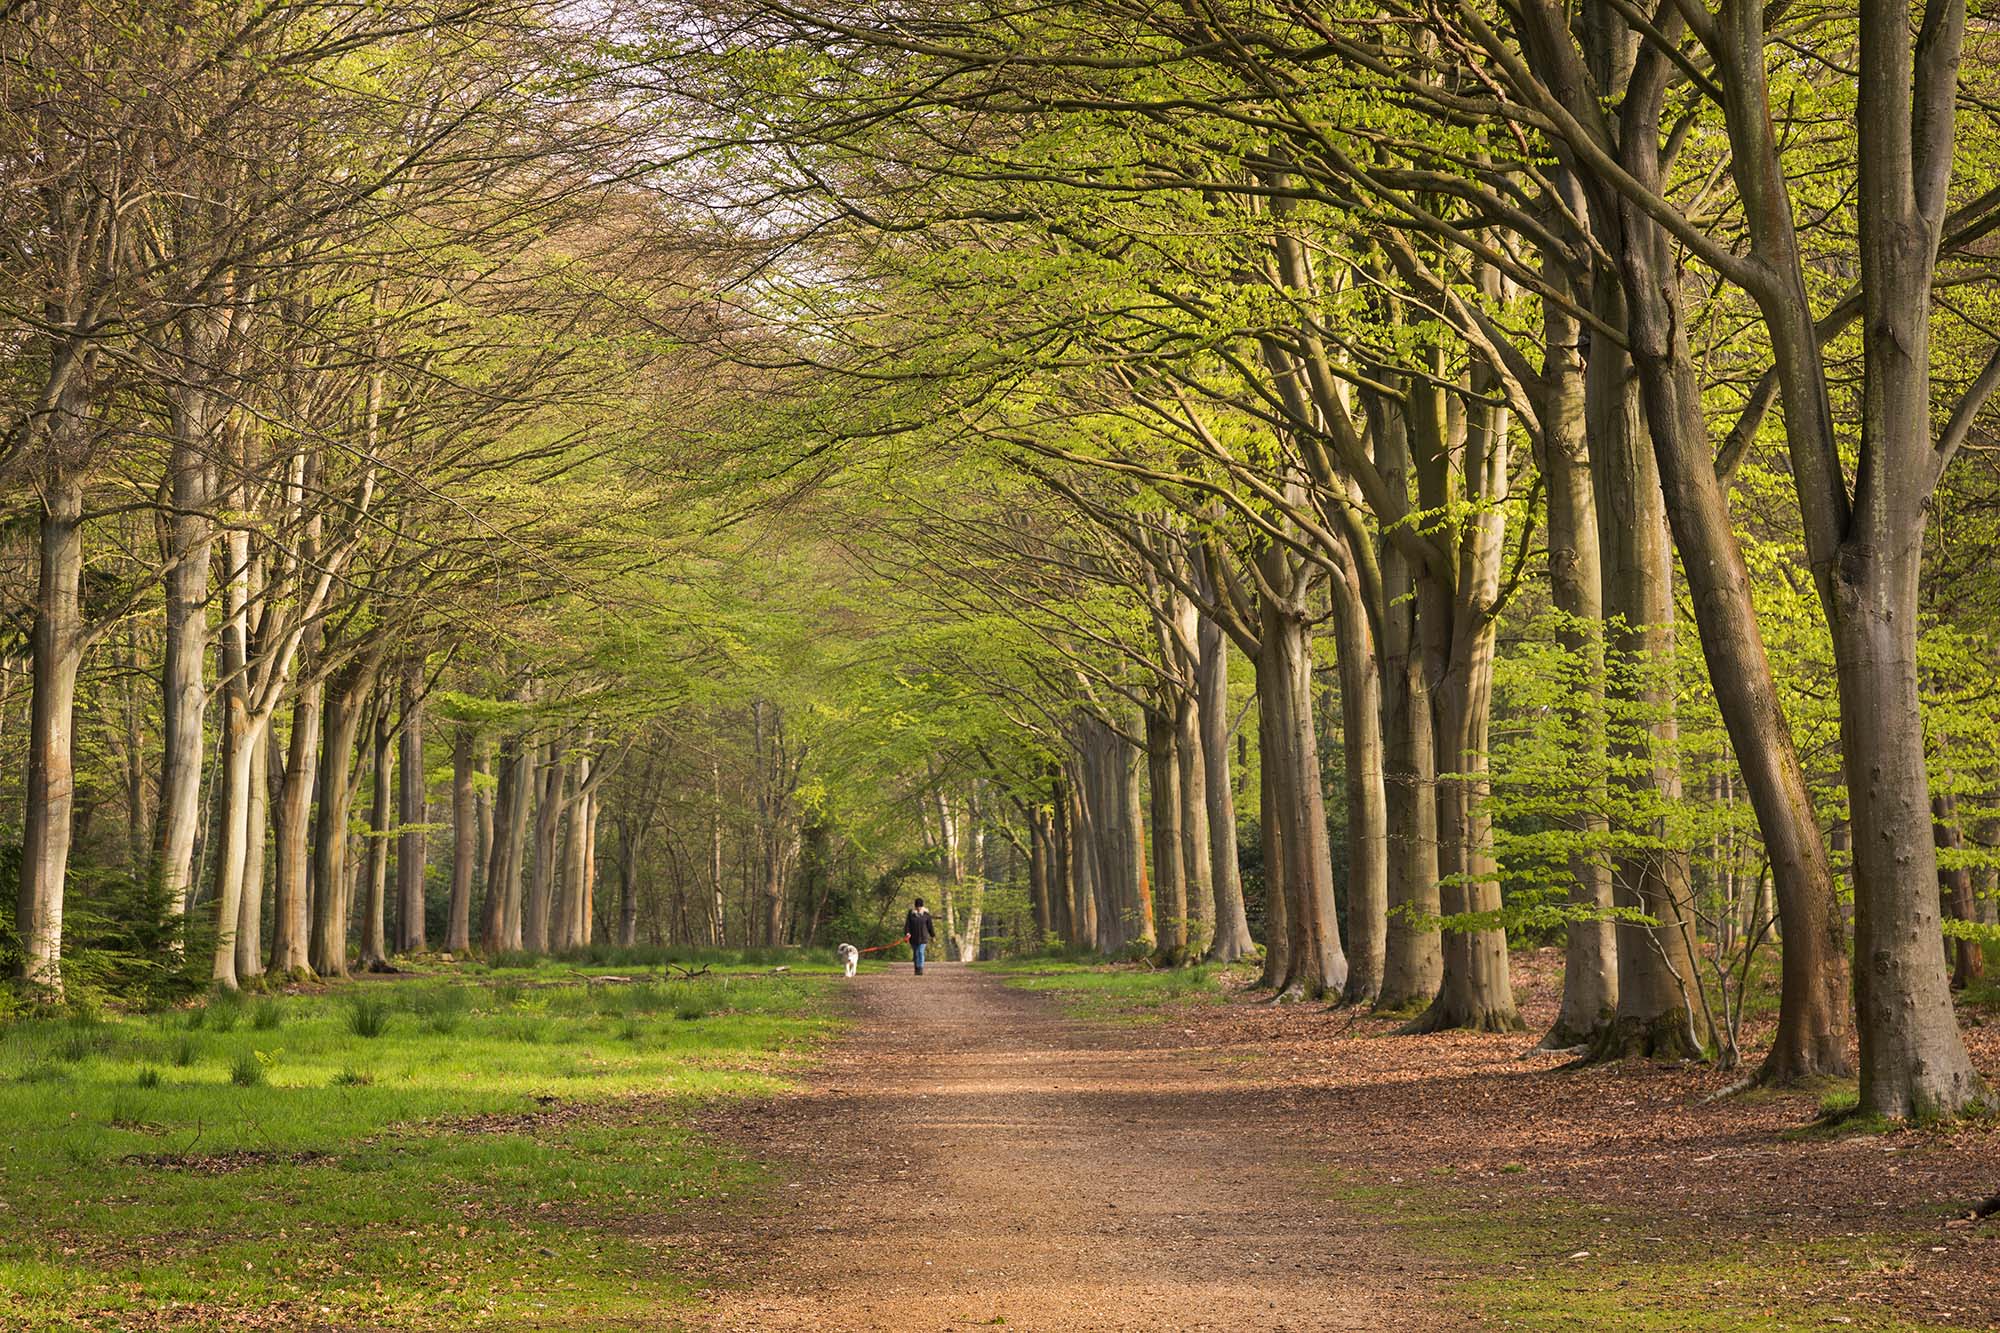 Person with a dog walking along an avenue lined with trees